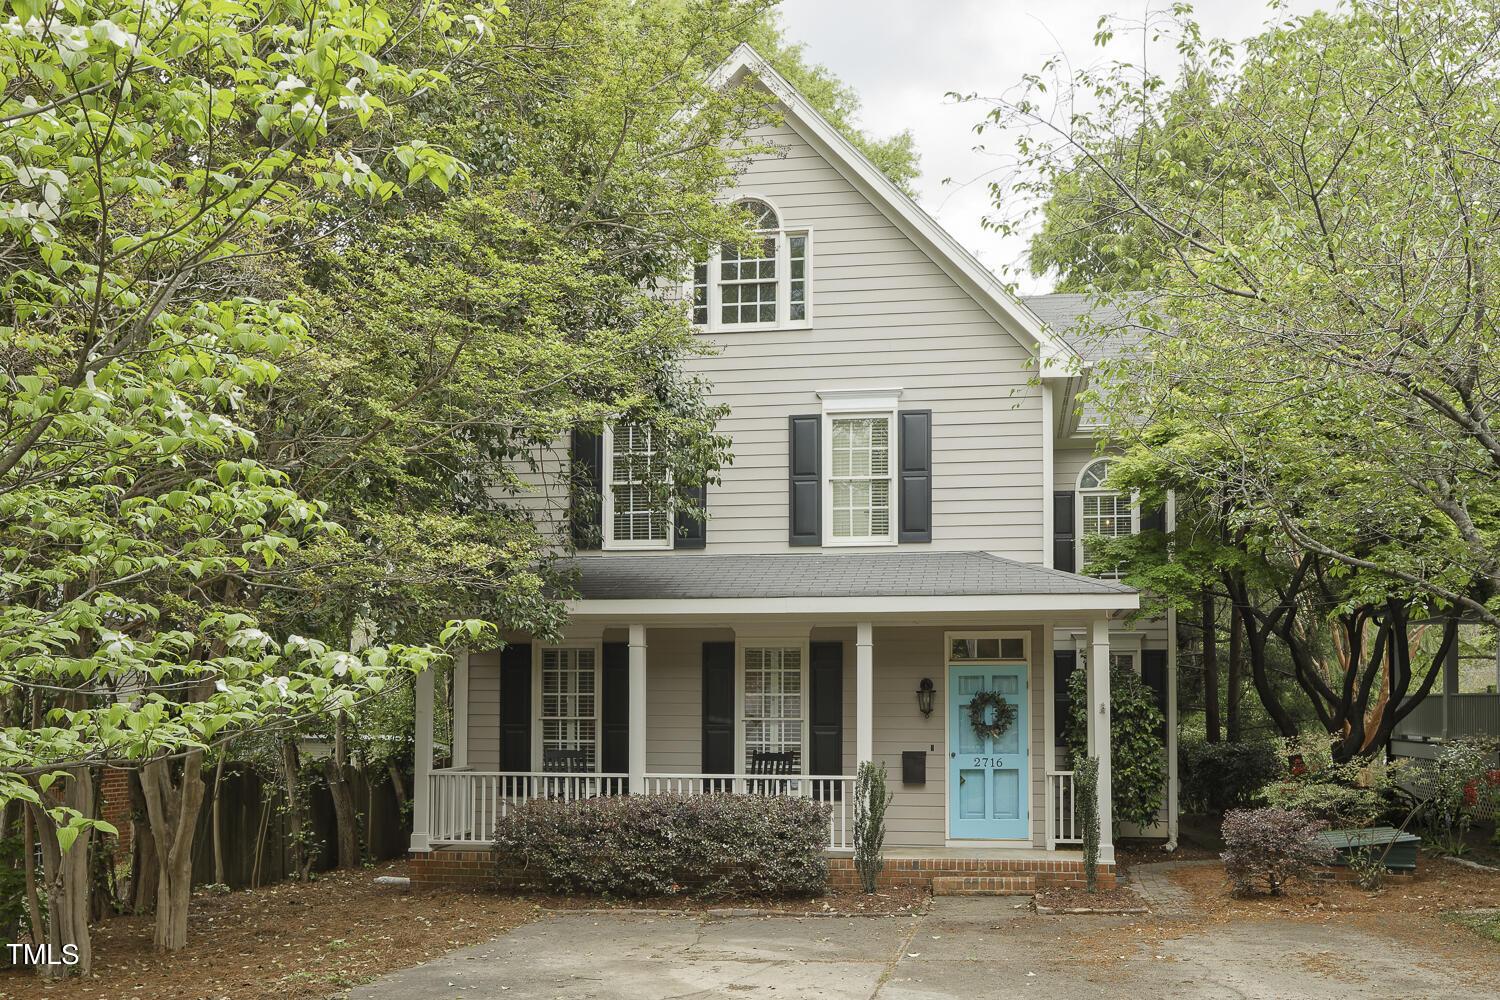 Photo one of 2716 Clark Ave Raleigh NC 27607 | MLS 10022402